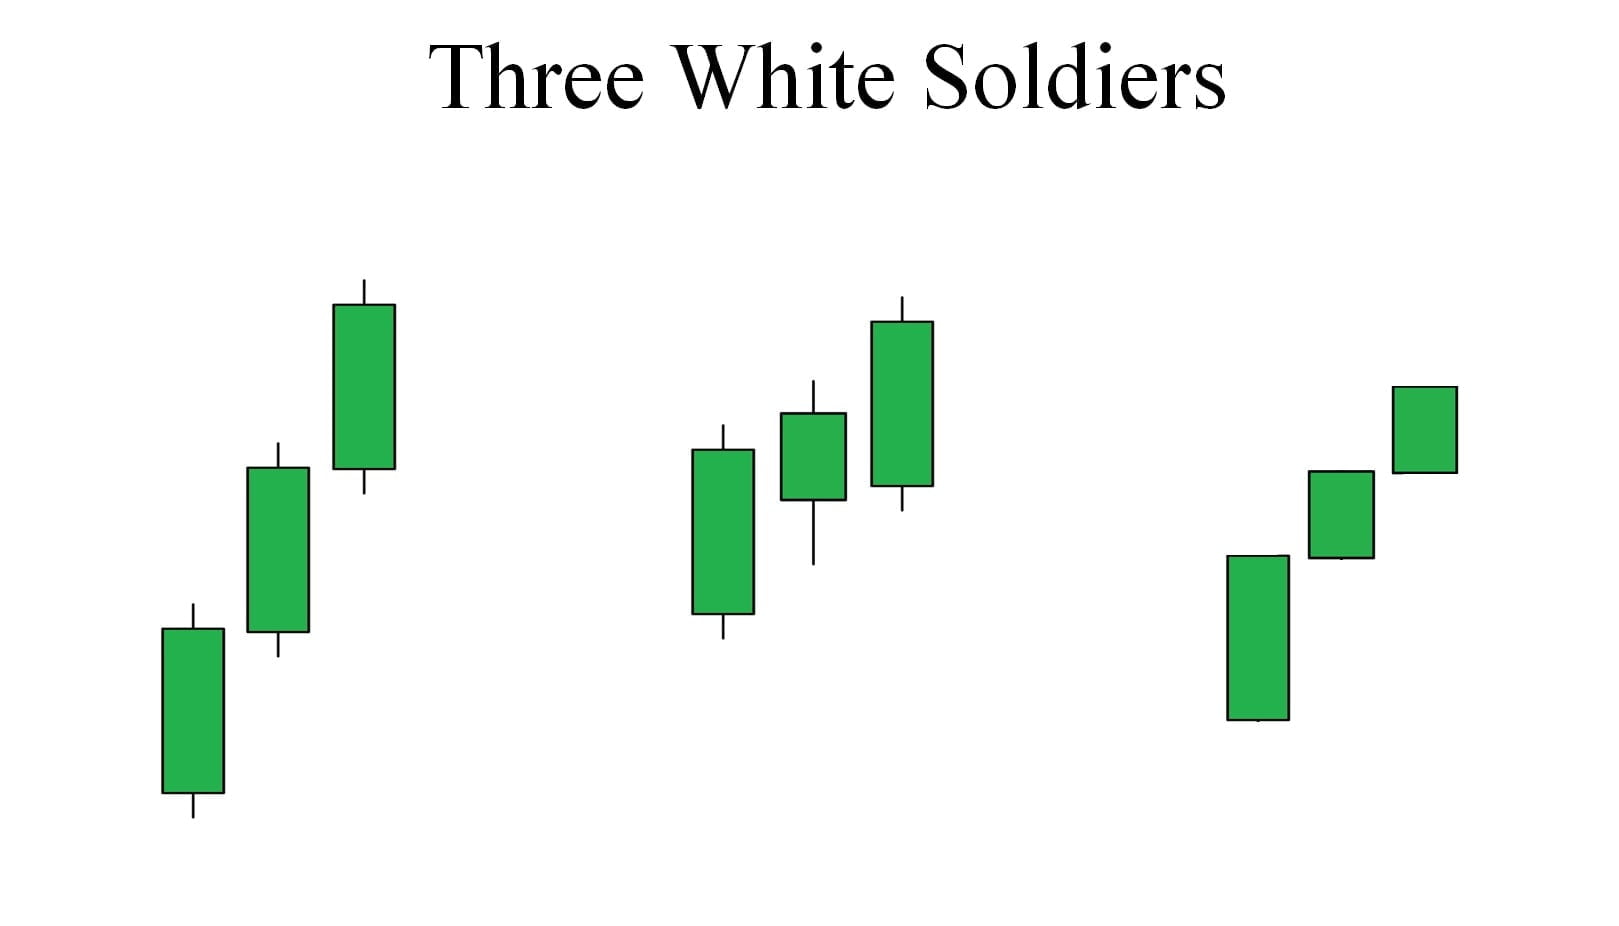 <!-- wp:heading -->
<h2>How to Identify the Three White Soldiers </h2>
<!-- /wp:heading -->